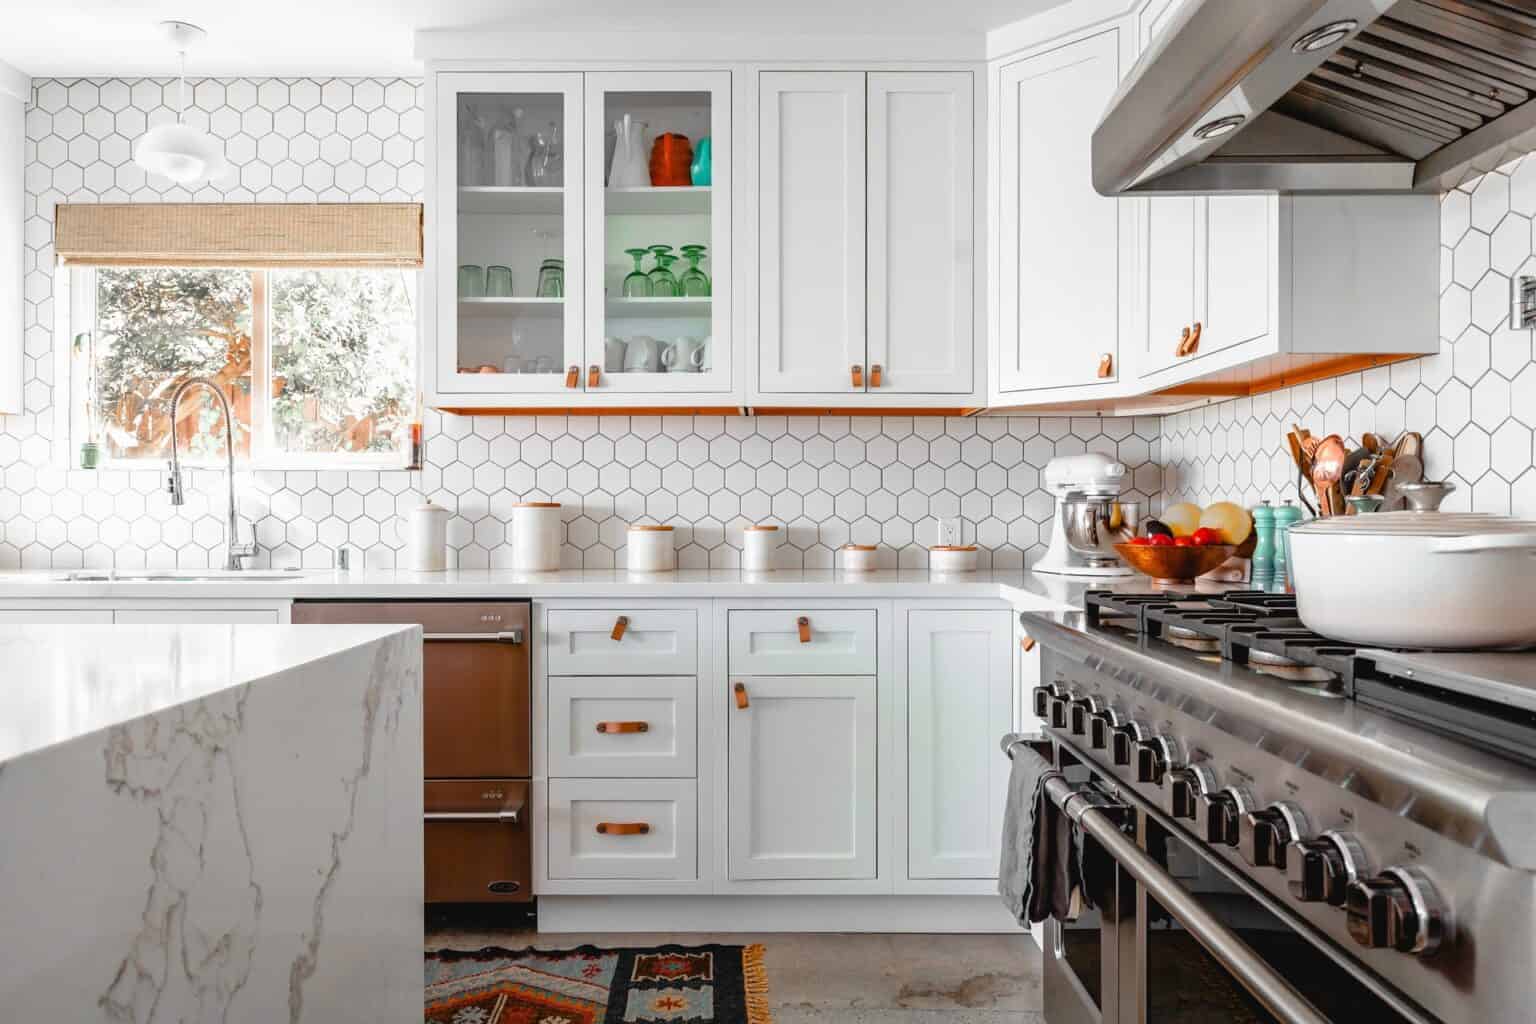 A pretty white-colored wall kitchen cabinet in a white-tiled kitchen.